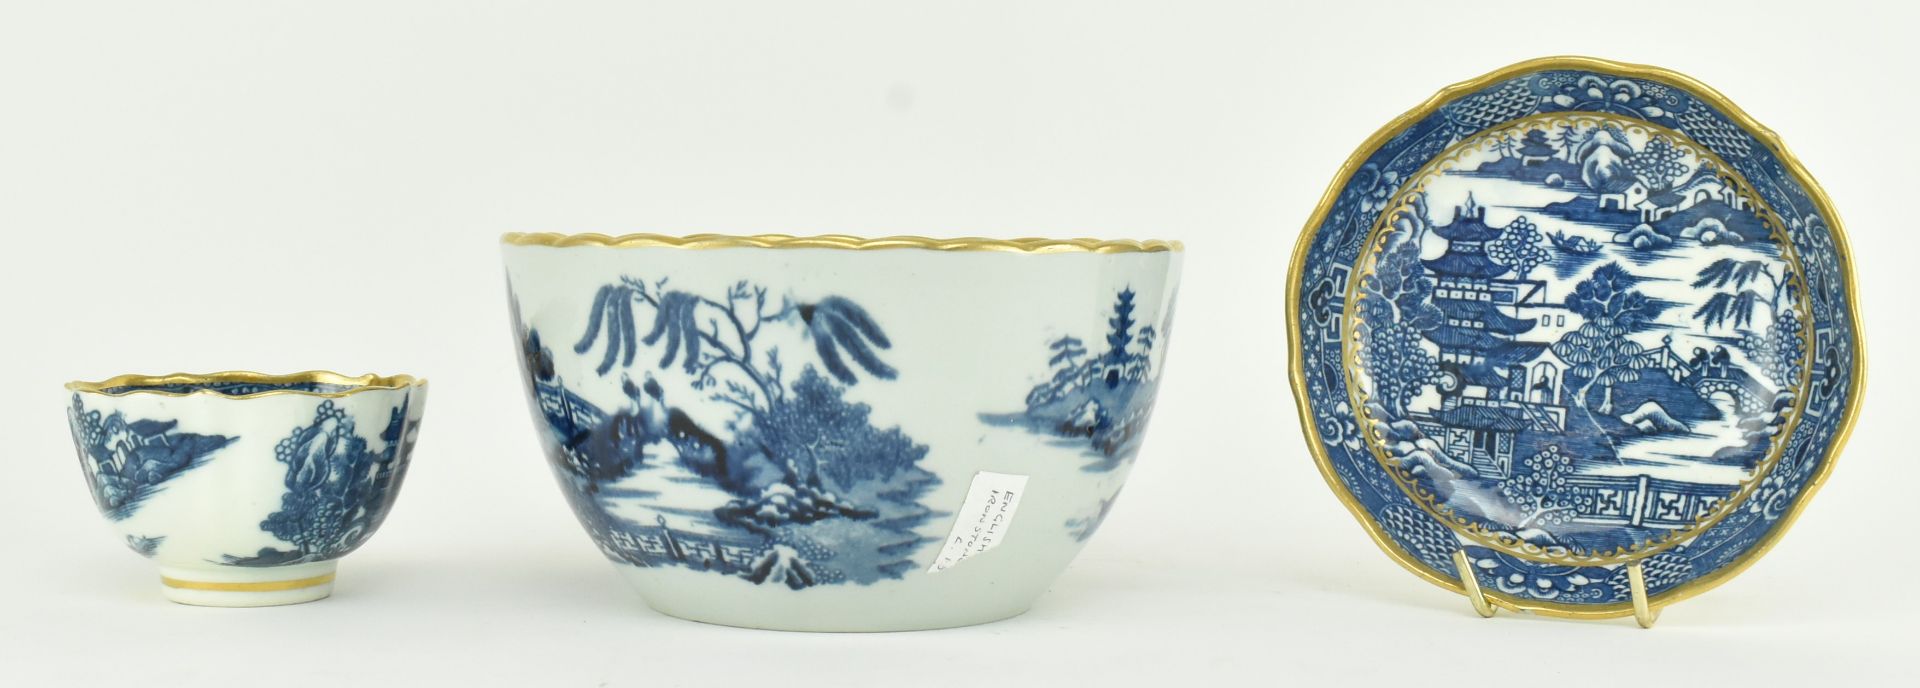 18TH CENTURY CAUGHTLEY CUP & SAUCER AND N IRONSTONE BOWL - Image 2 of 7